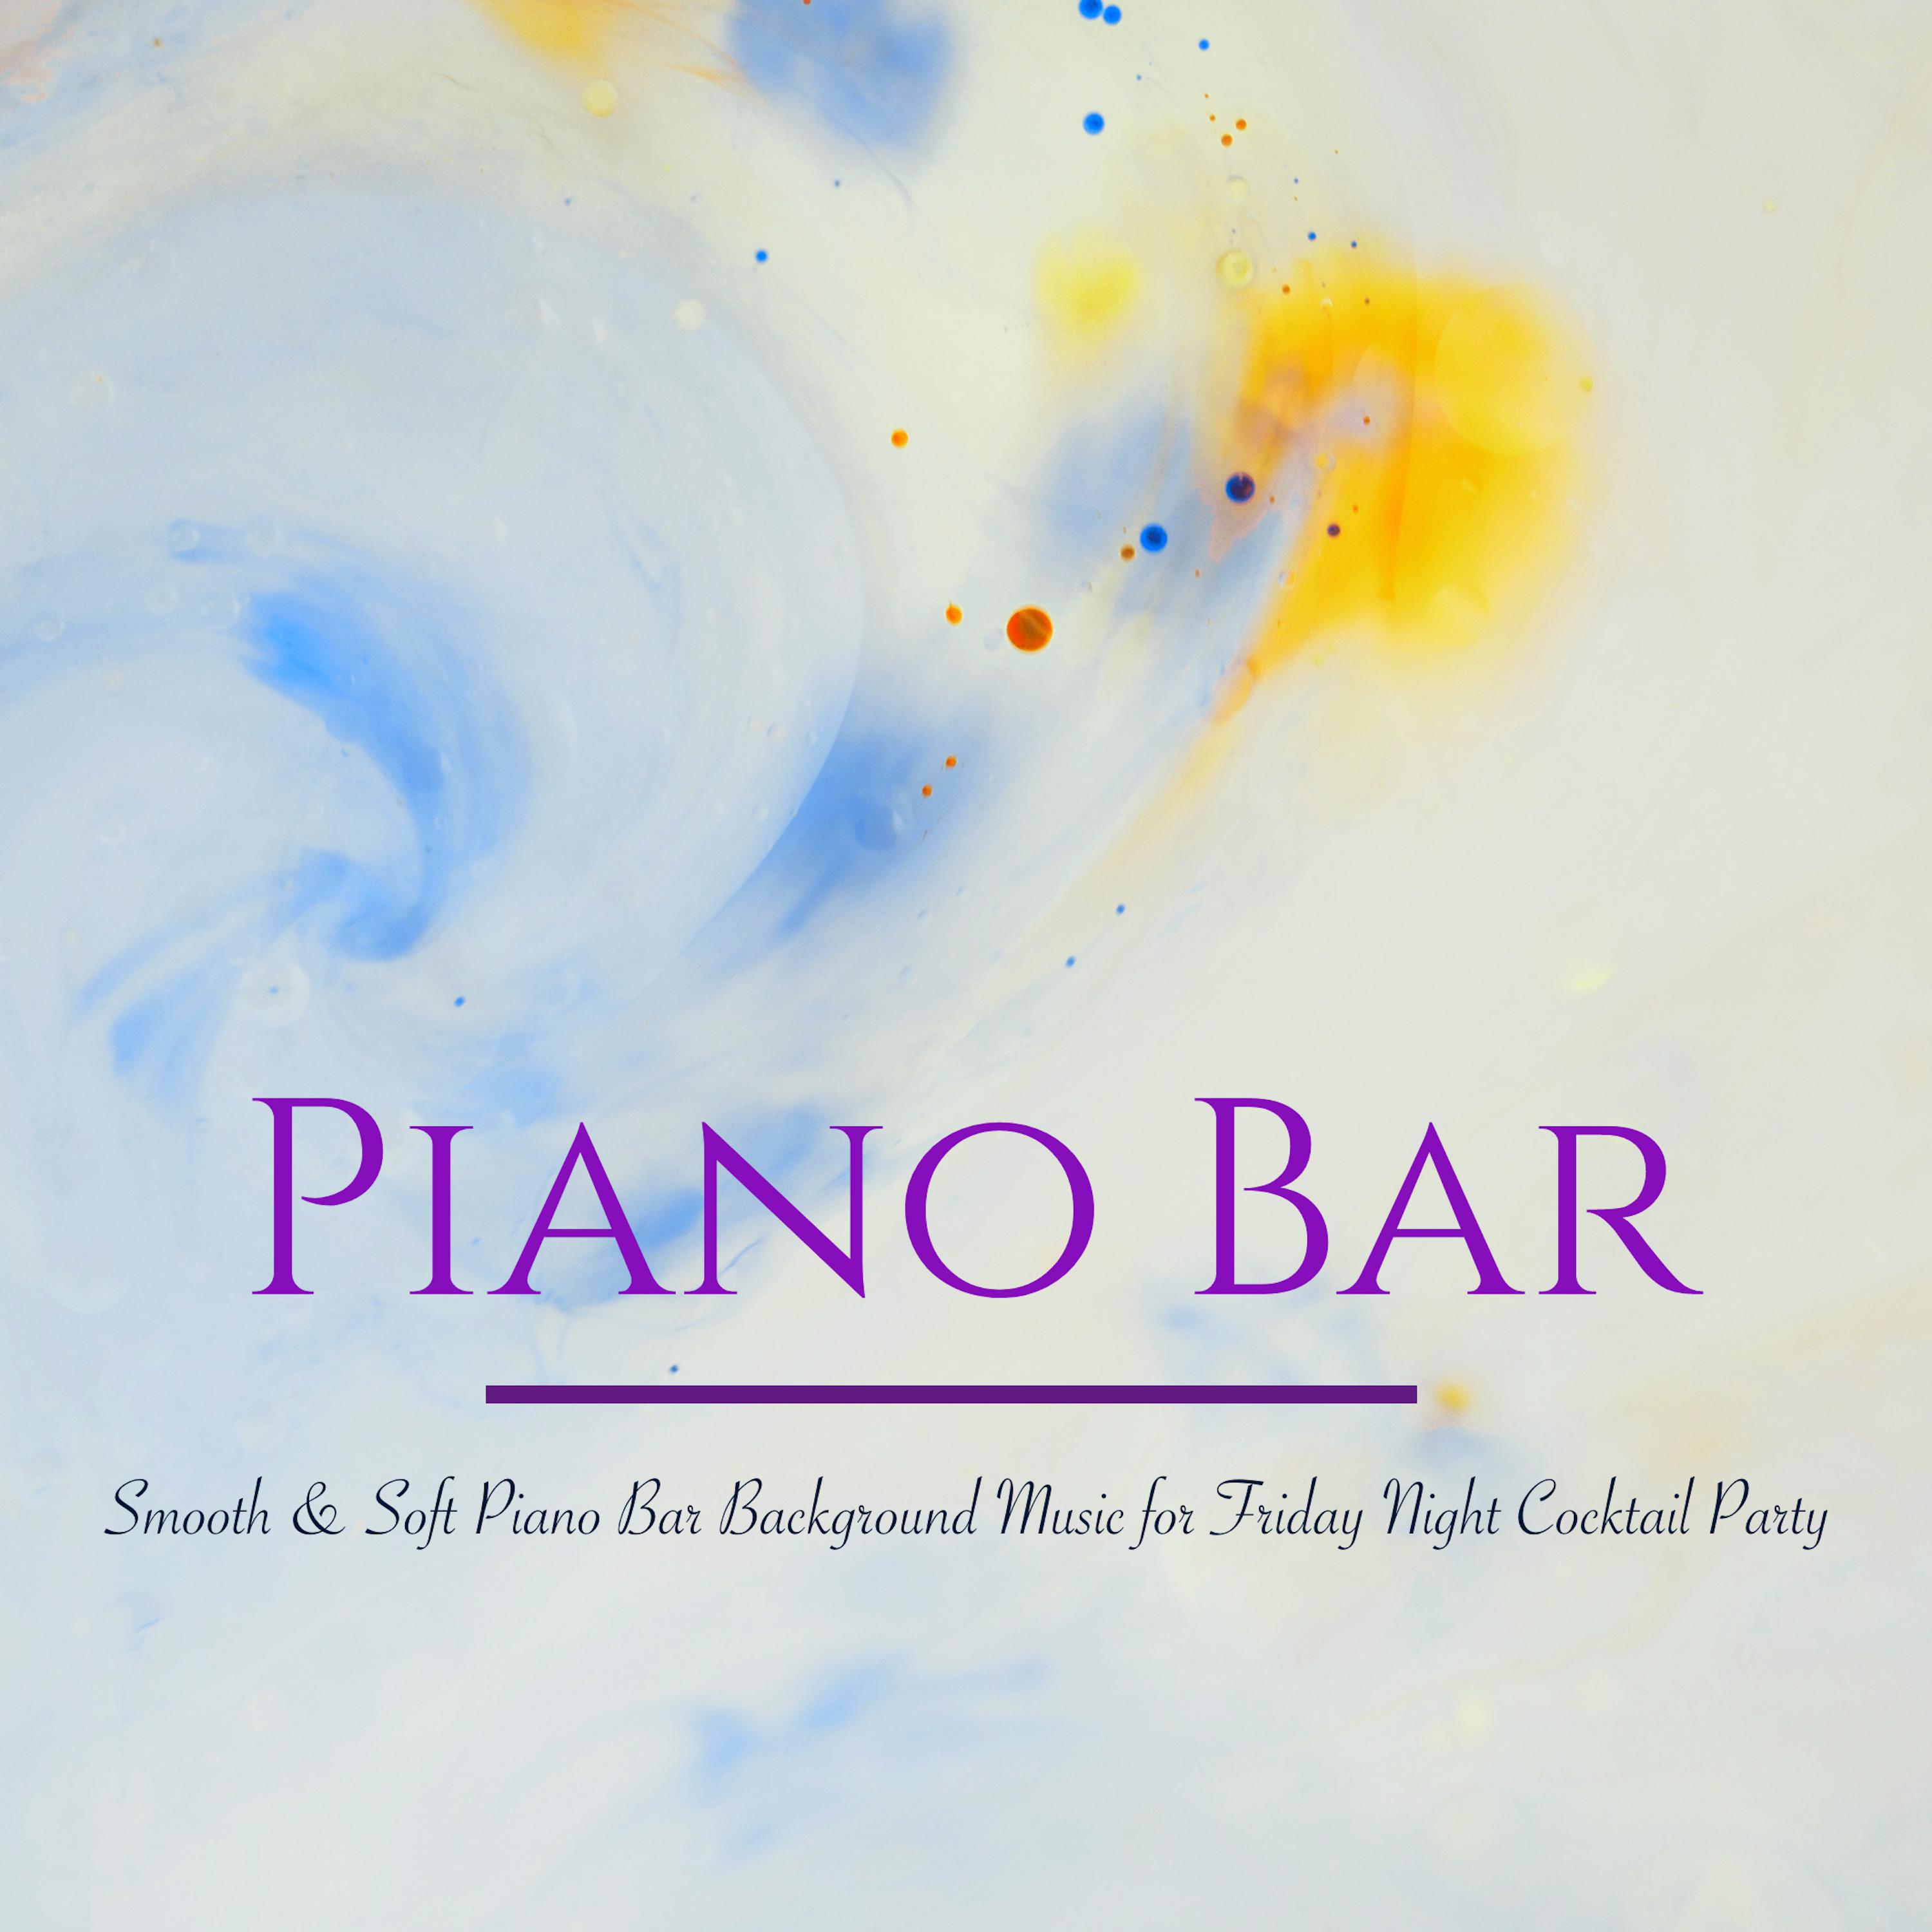 Piano Bar  Smooth  Soft Piano Bar Background Music for Friday Night Cocktail Party